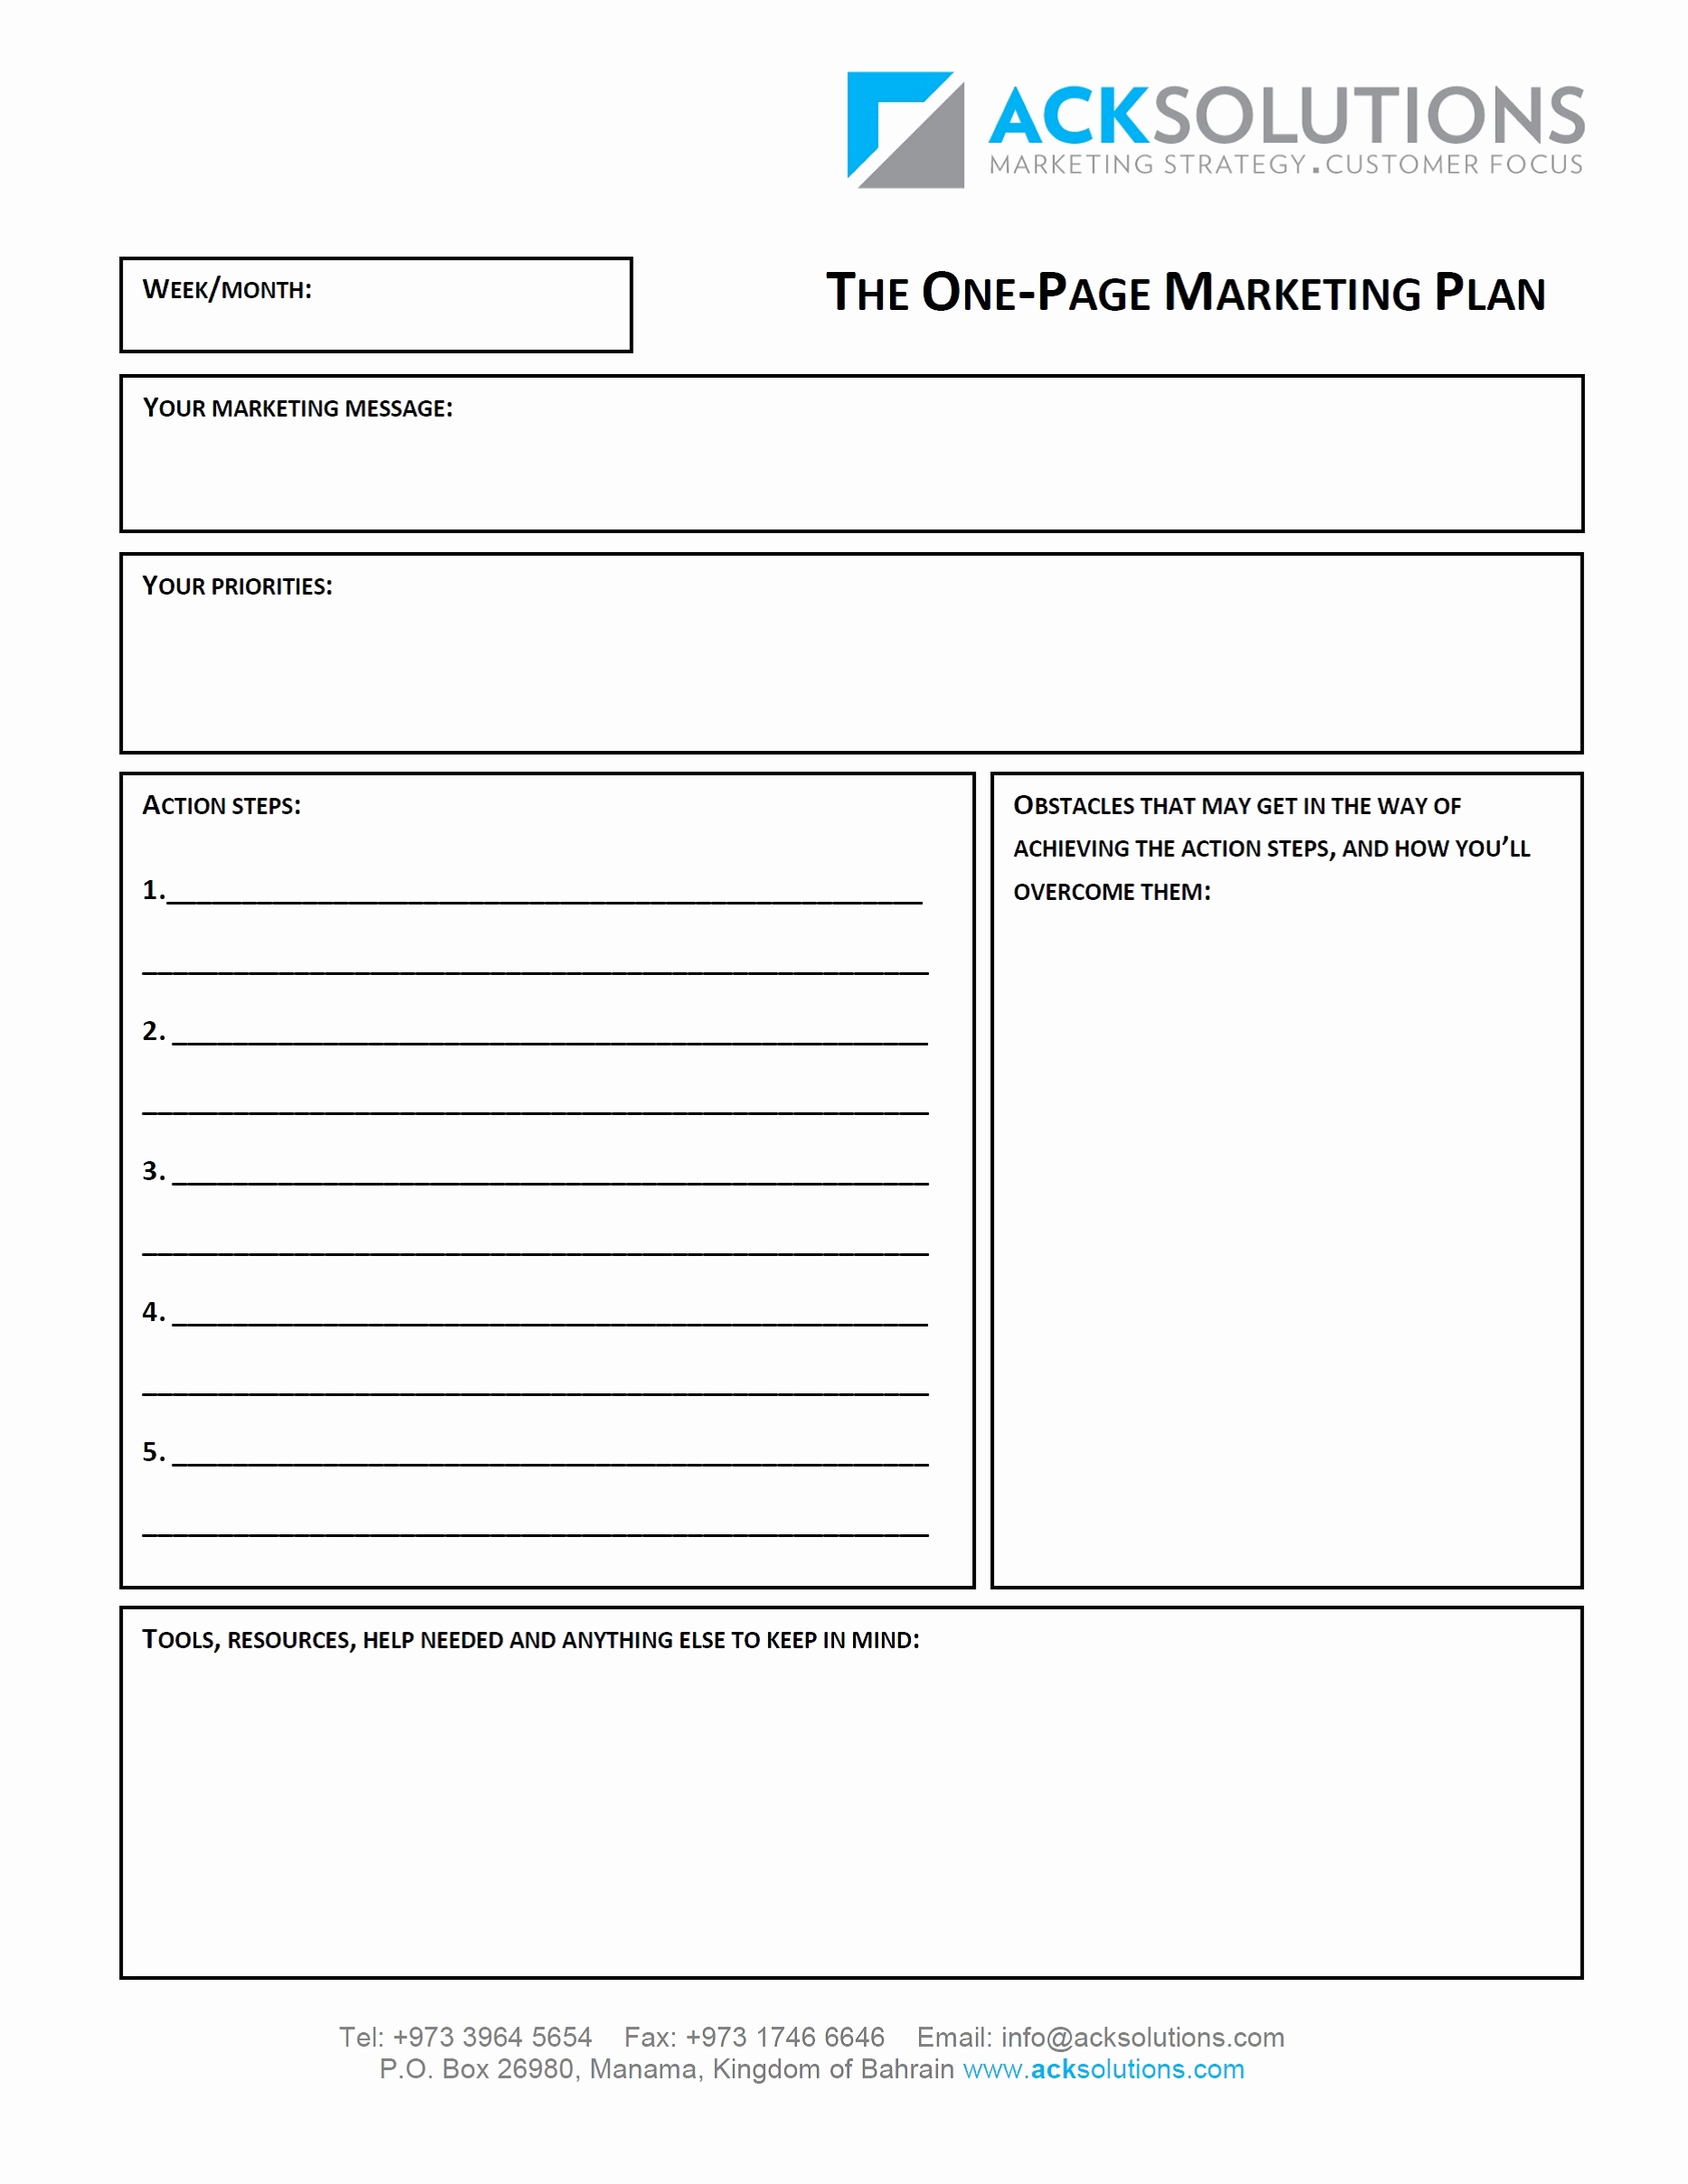 Blank One Page Marketing Plan Example